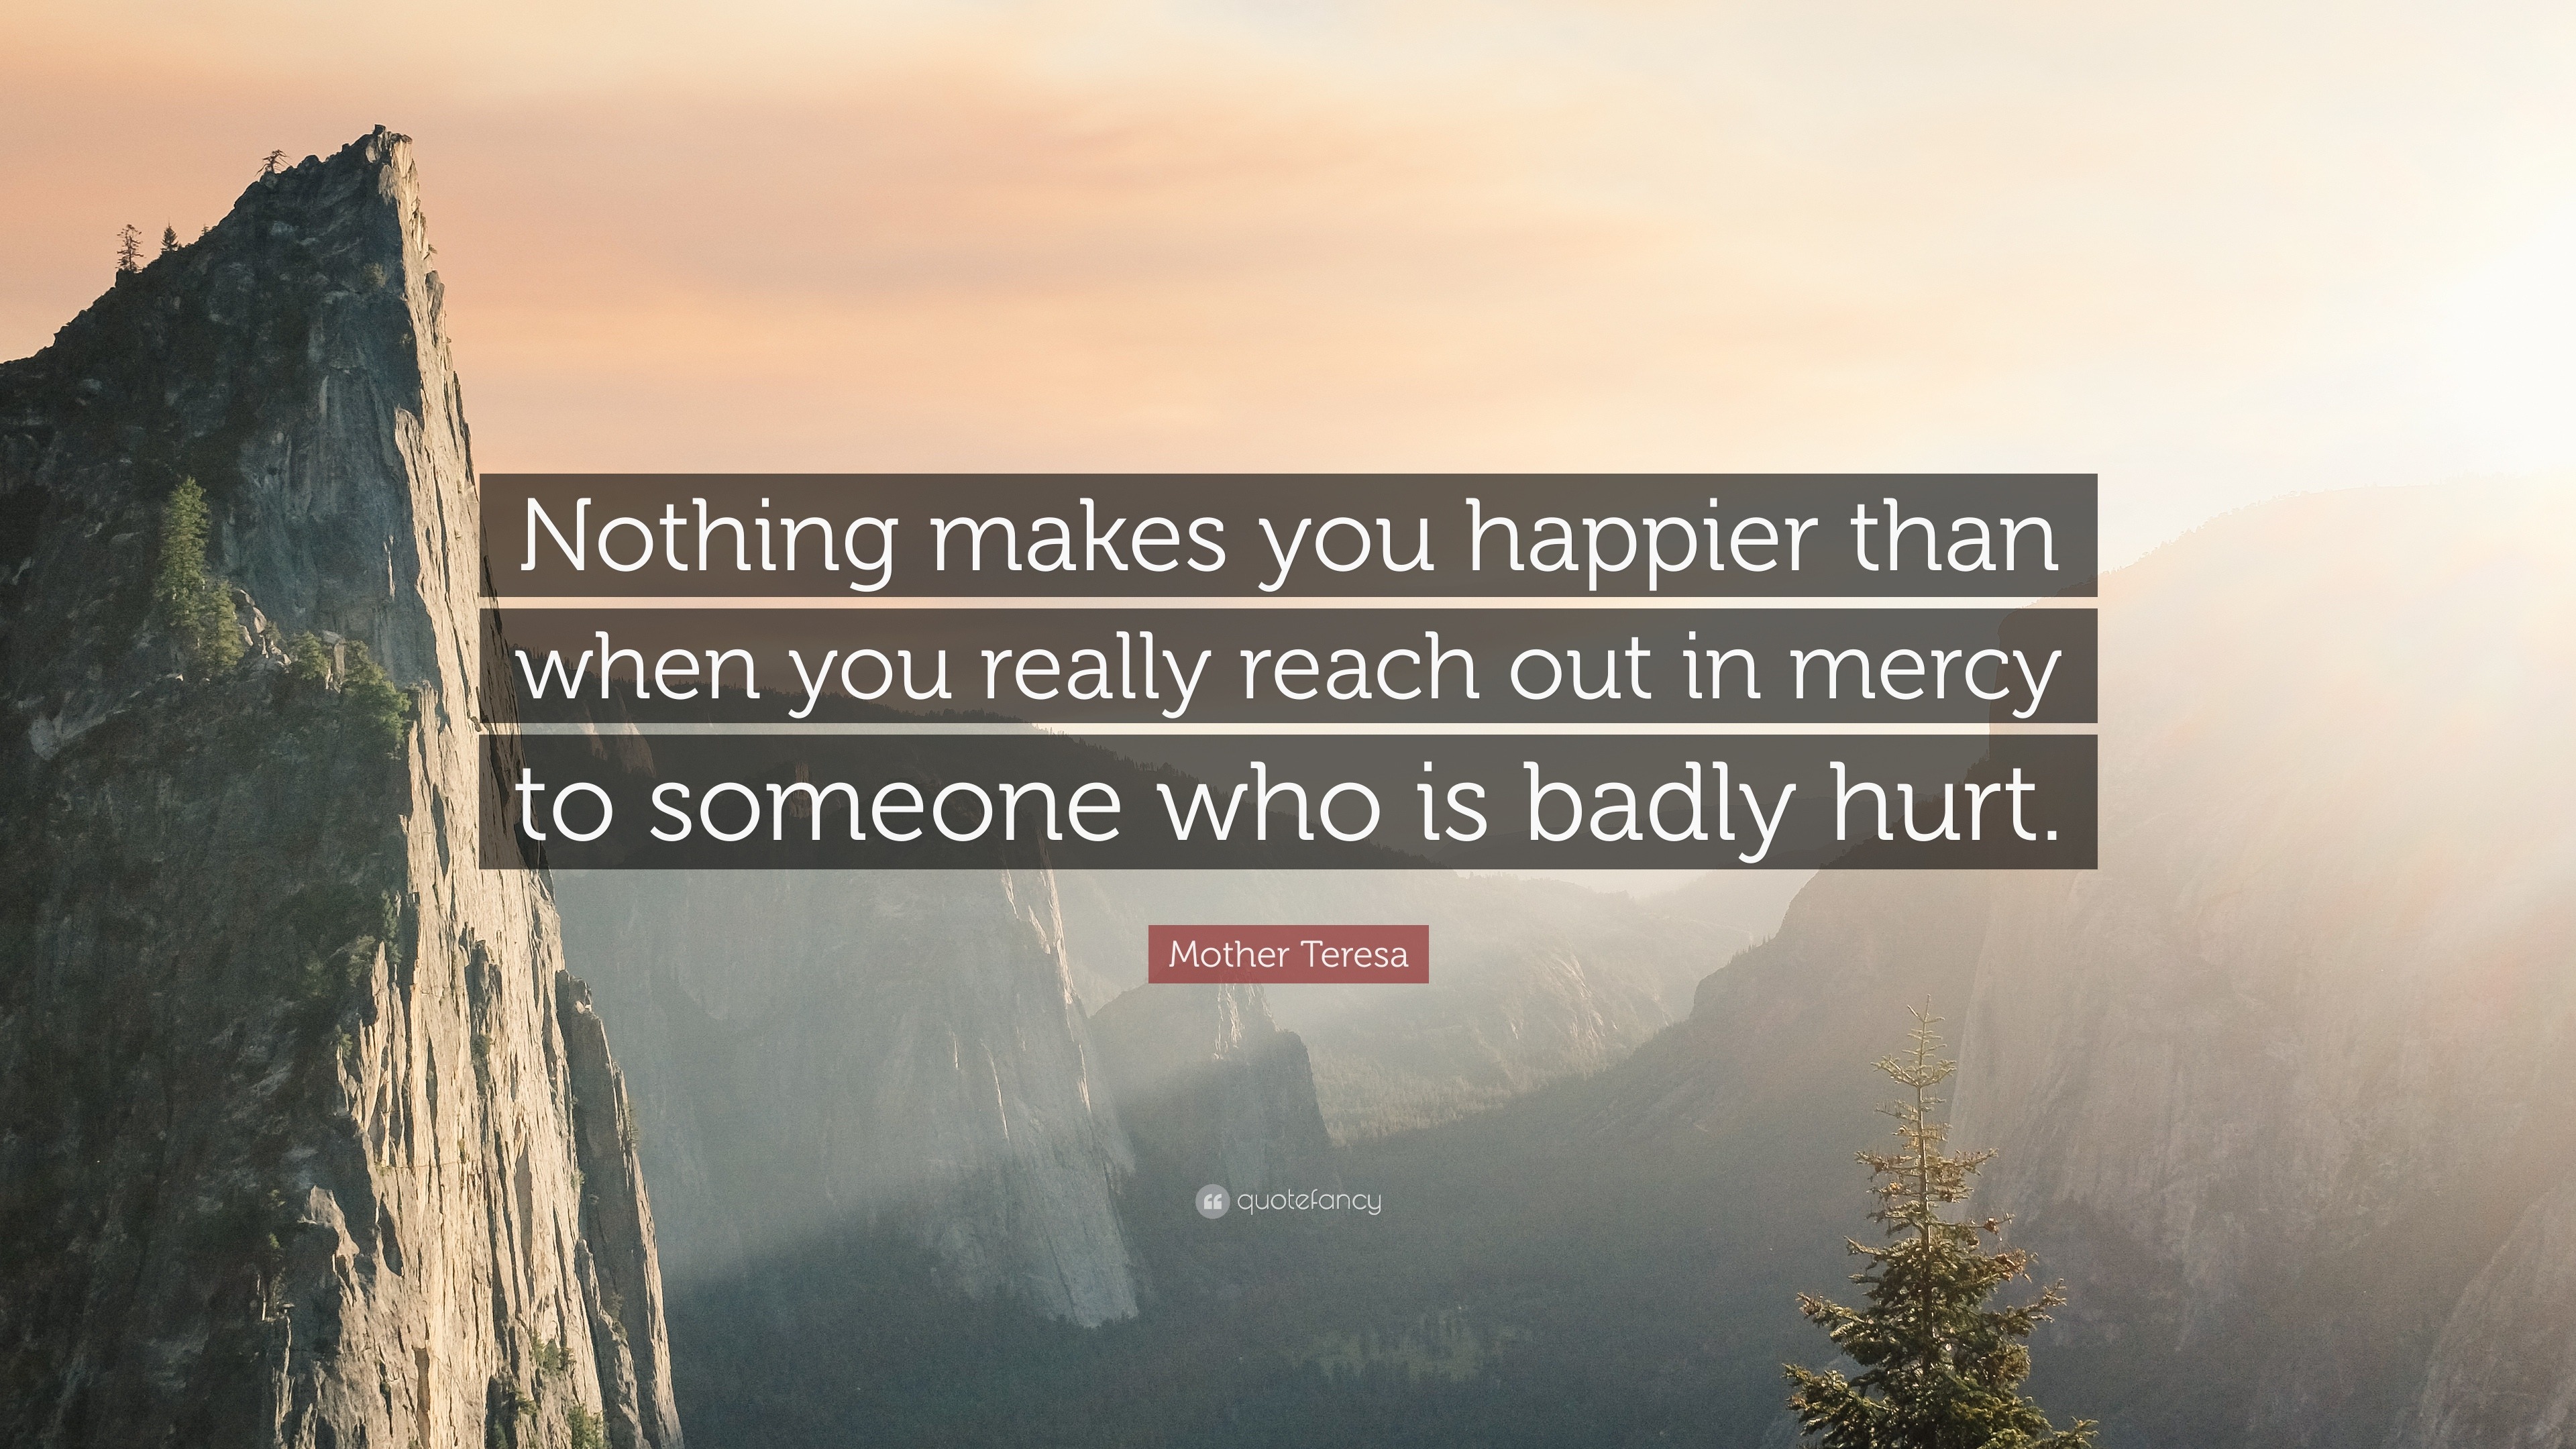 Mother Teresa Quote: “Nothing makes you happier than when you really ...